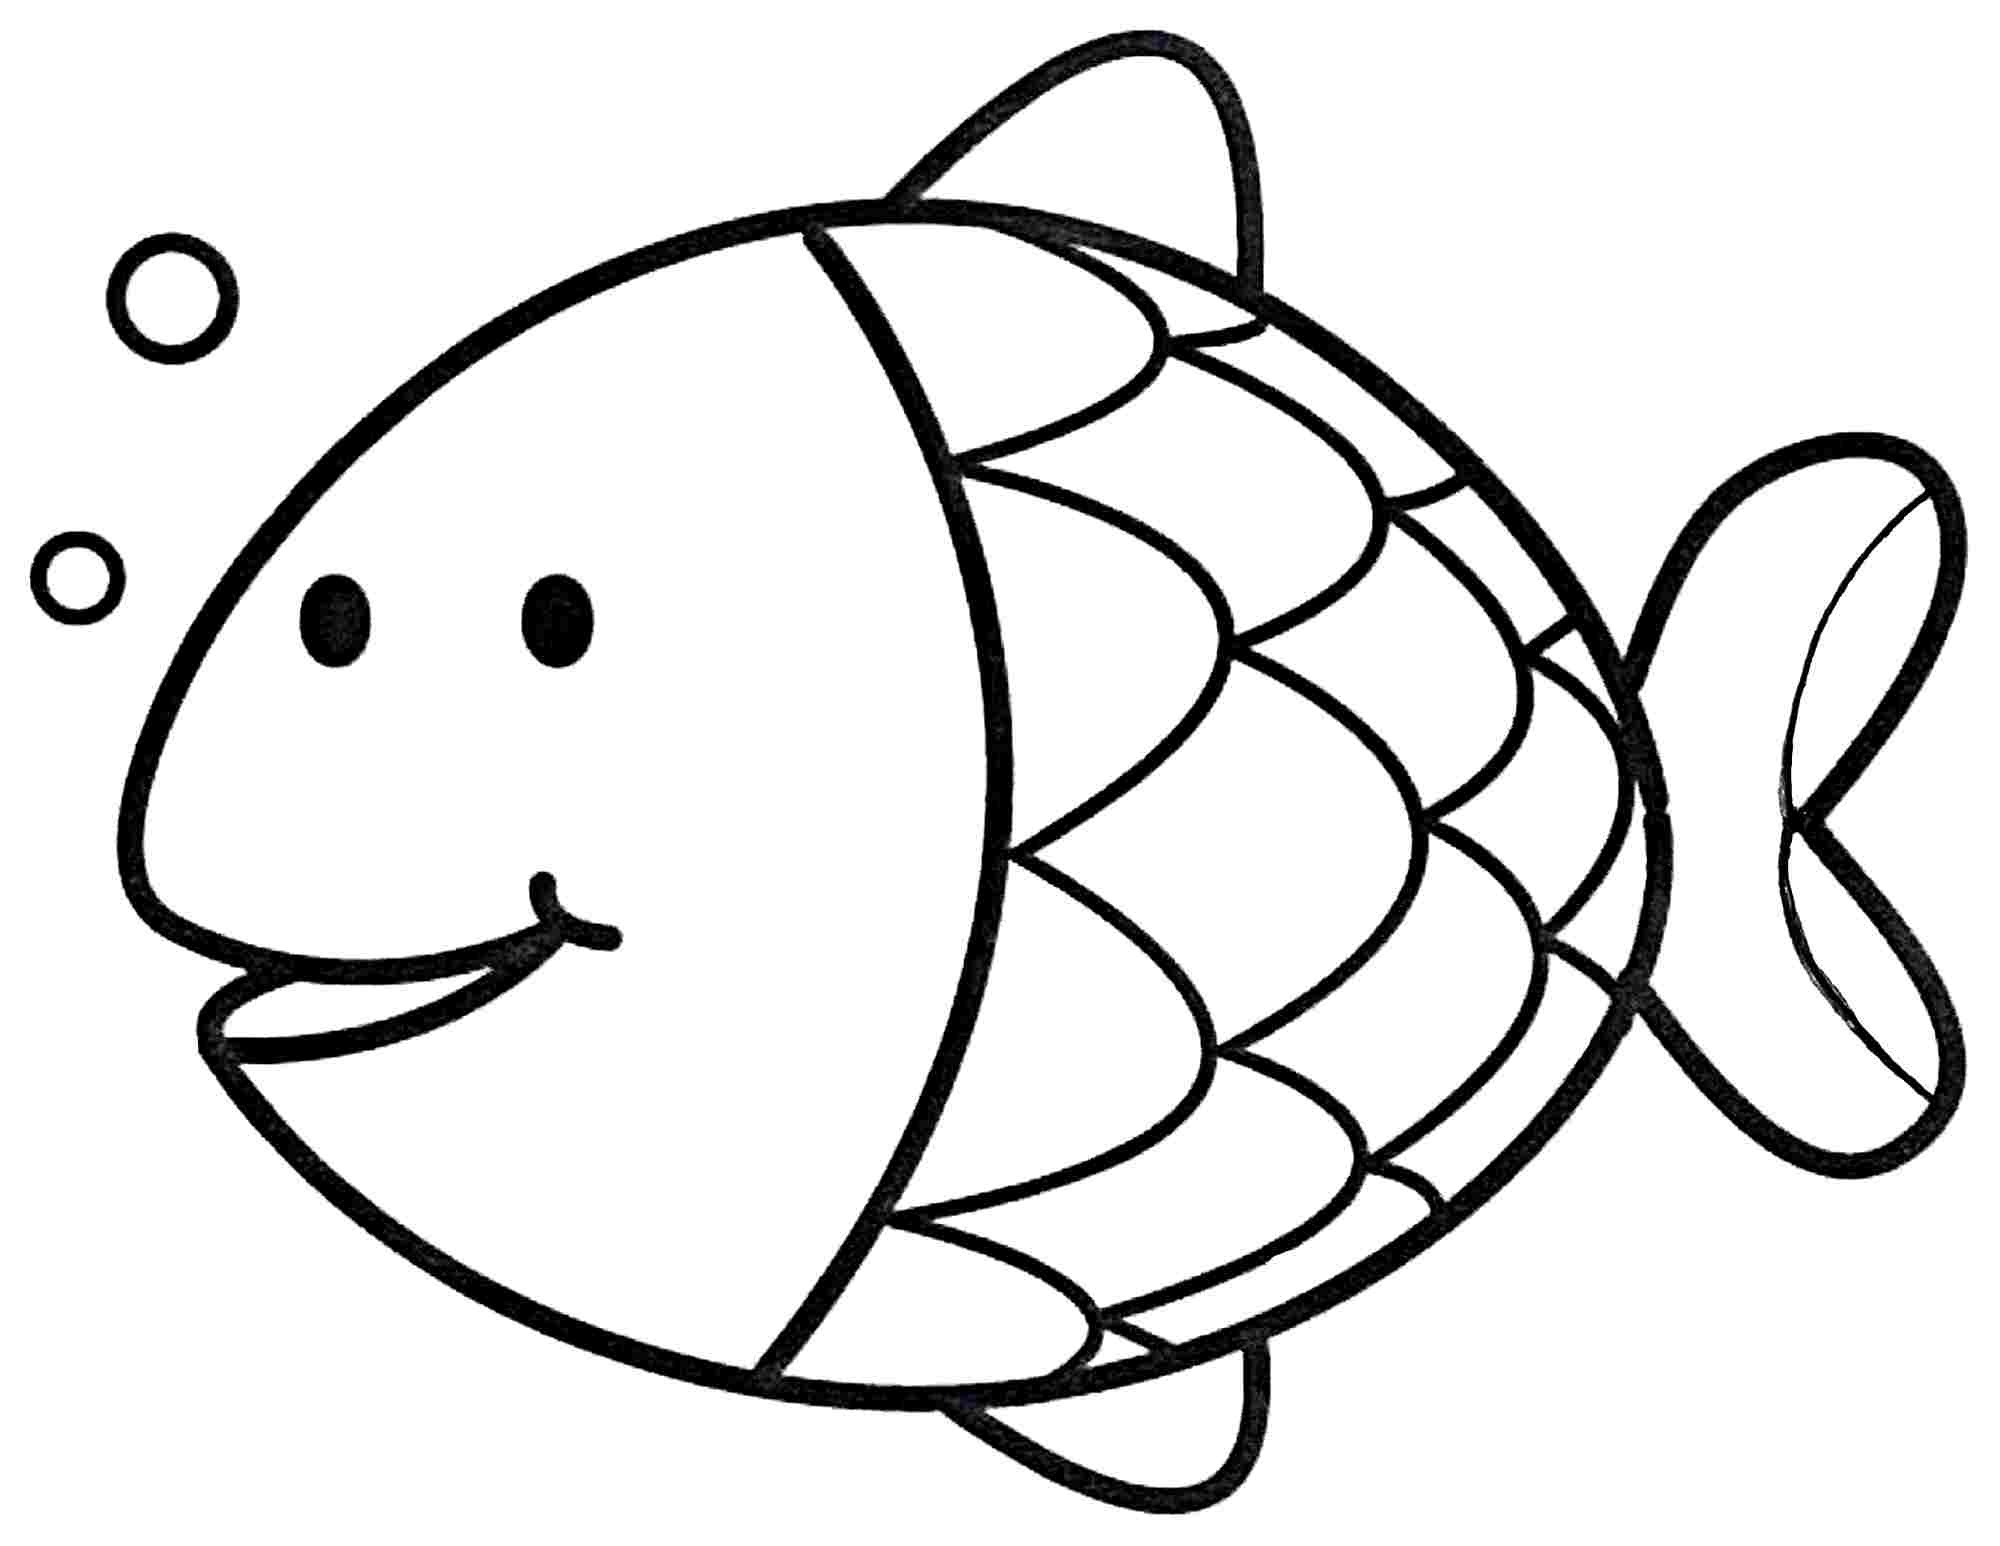 Coloring Page Fish Fish Coloring Pages 20 Nekoma   Kids Coloring ...